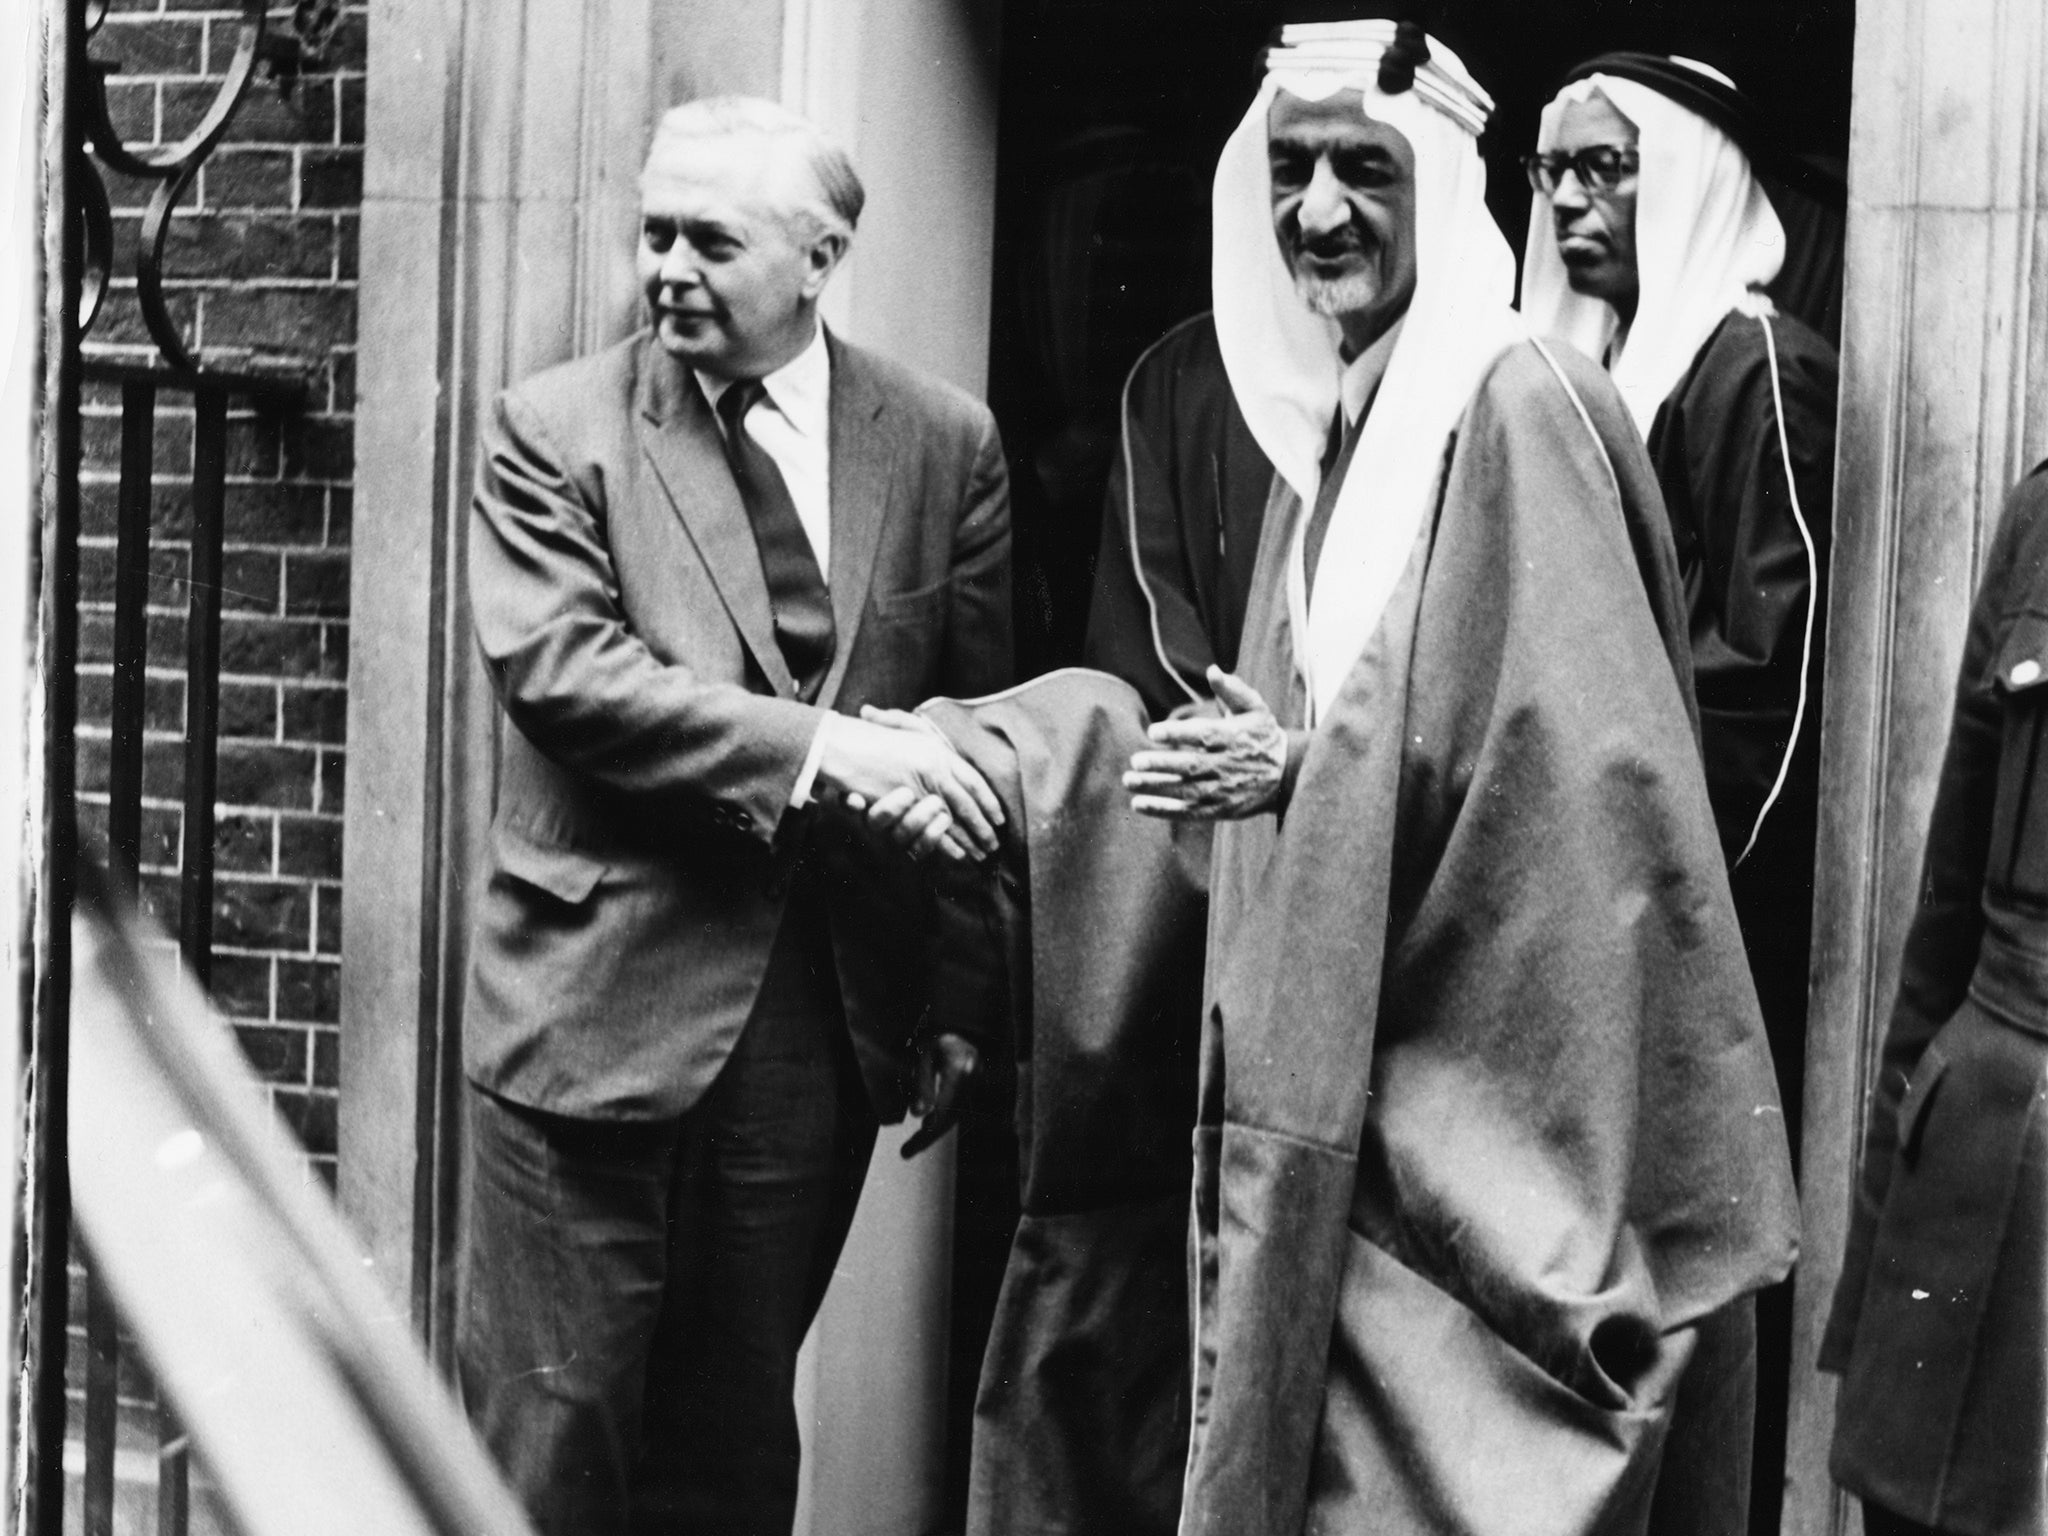 British Prime Minister Harold Wilson (left) shaking hands with King Faisal of Saudi Arabia, outside 10 Downing Street, London, May 23rd 1967